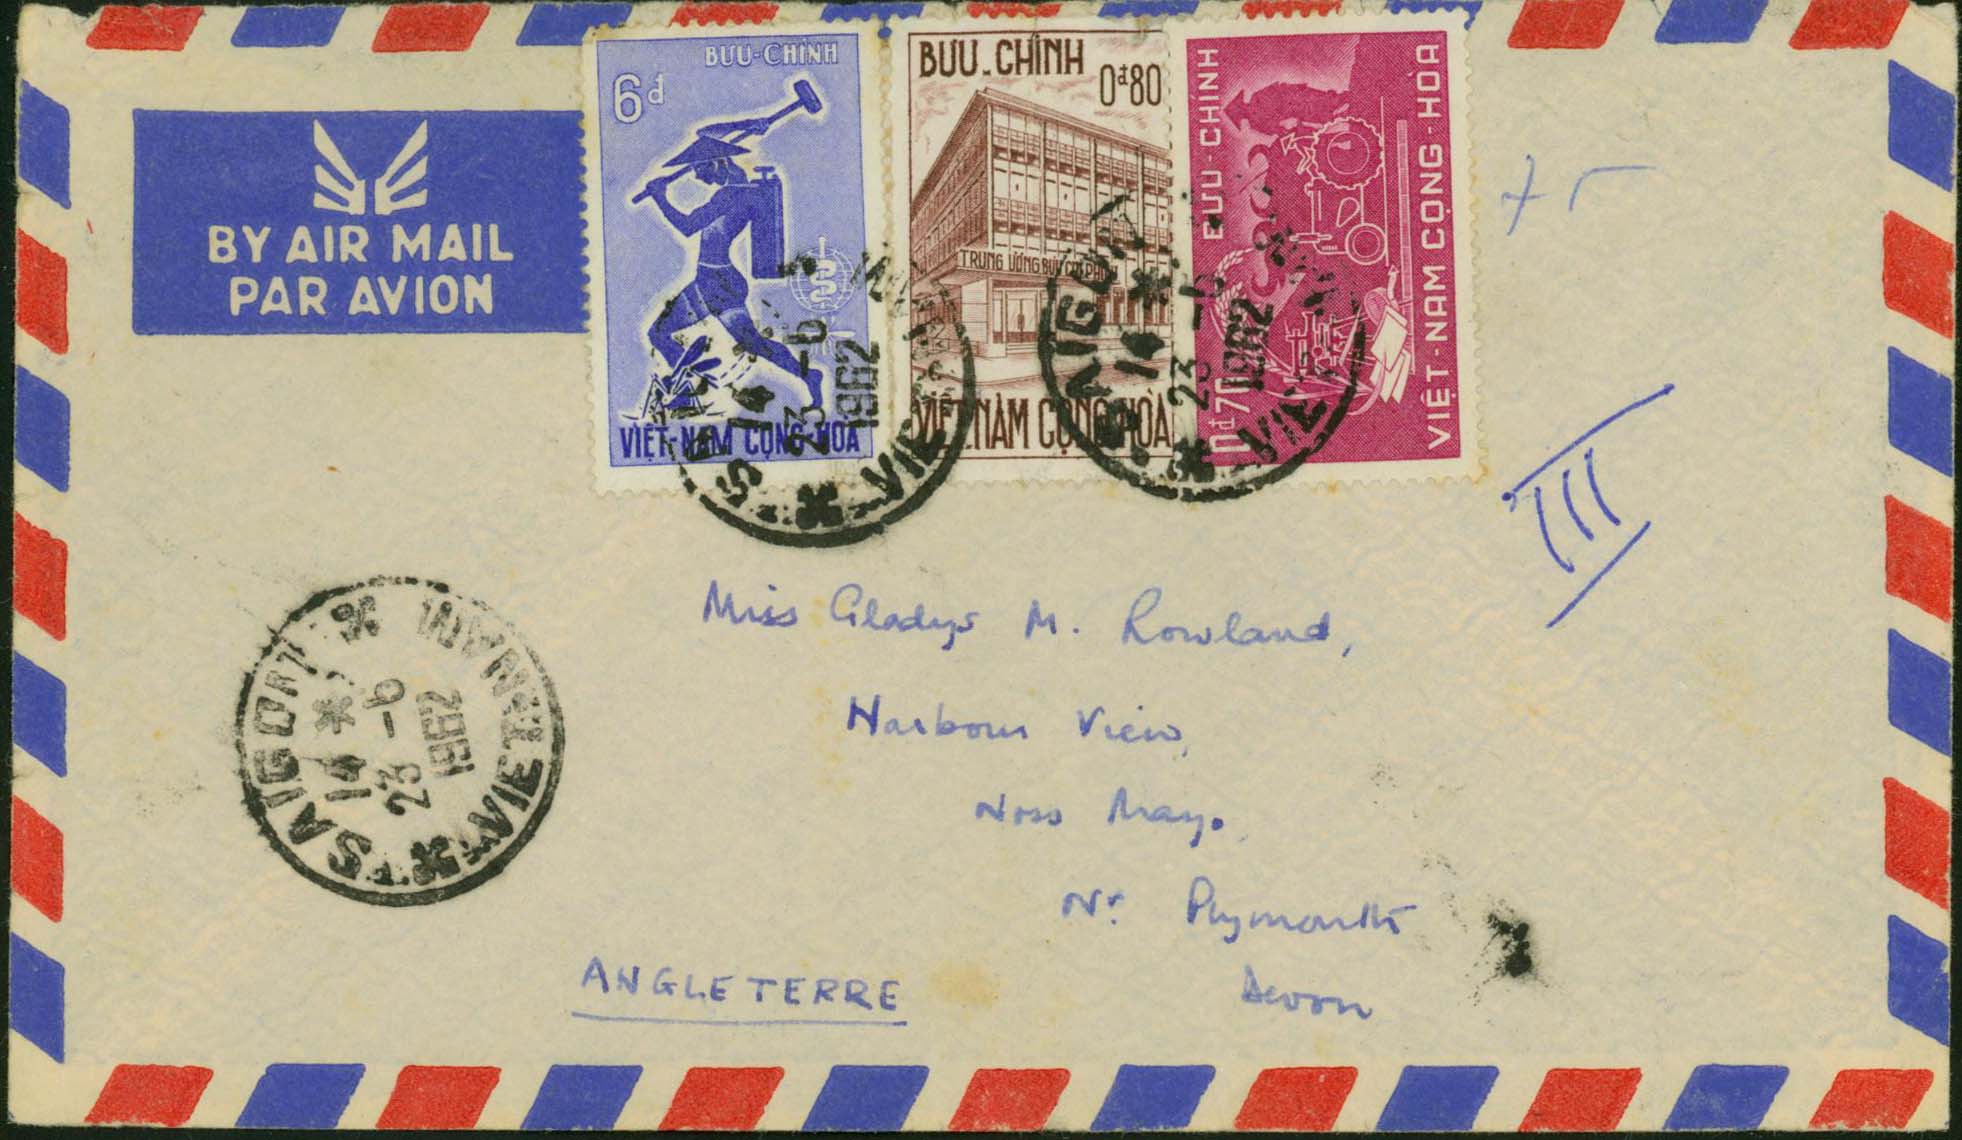 Vietnam - 1962/06/23 - Surface mail to England 1962/06/23